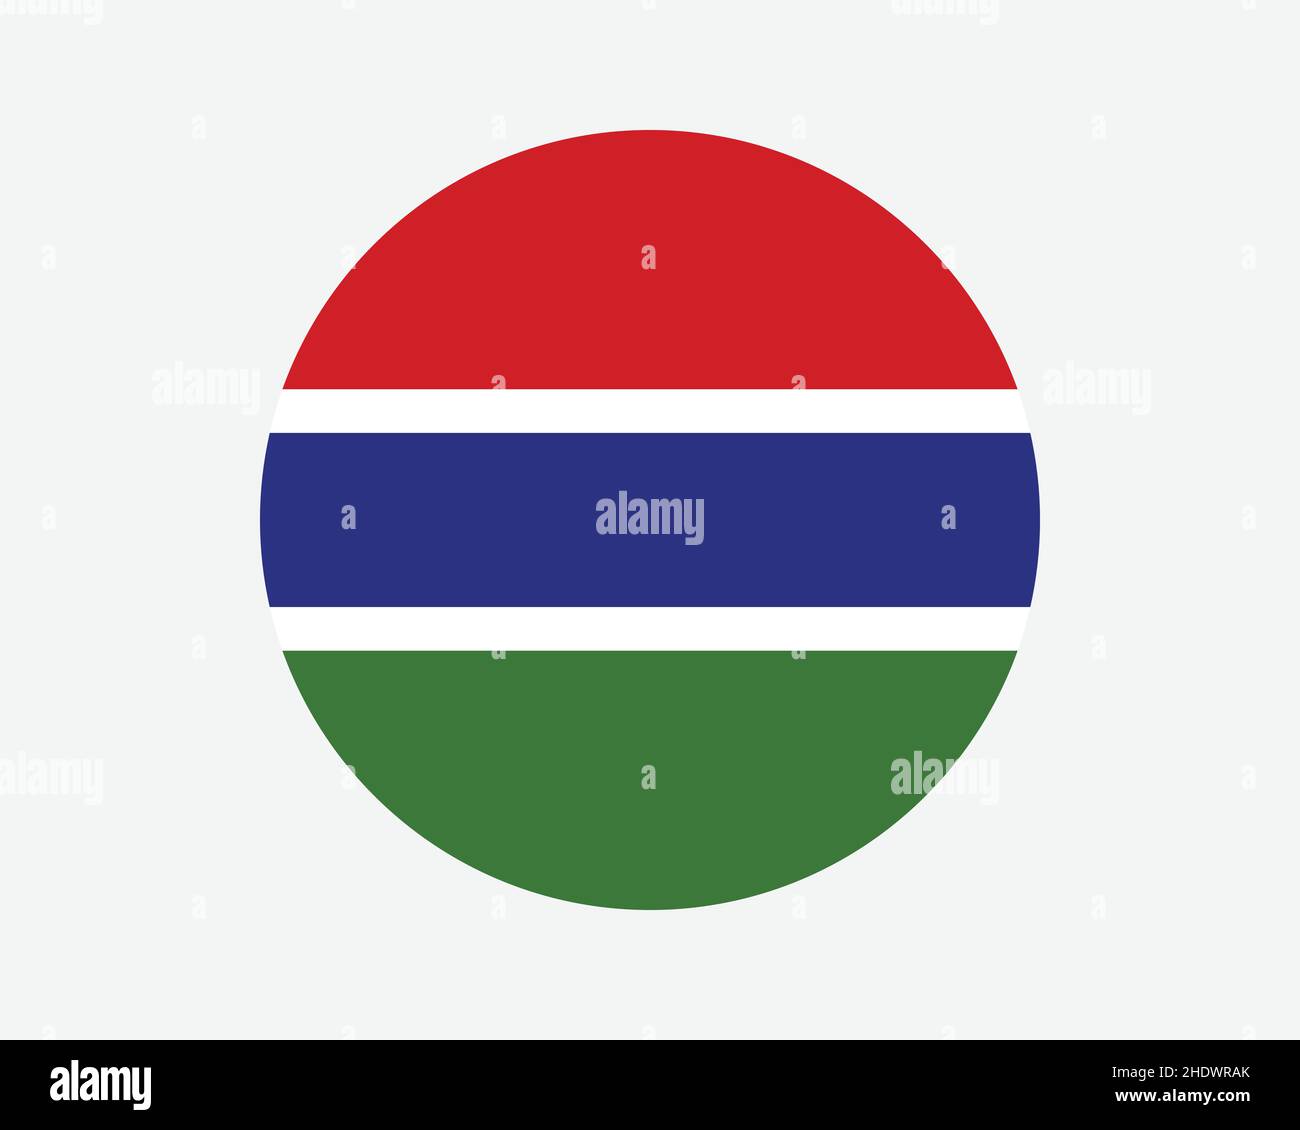 Gambia Round Country Flag. Gambian Circle National Flag. Republic of The Gambia Circular Shape Button Banner. EPS Vector Illustration. Stock Vector